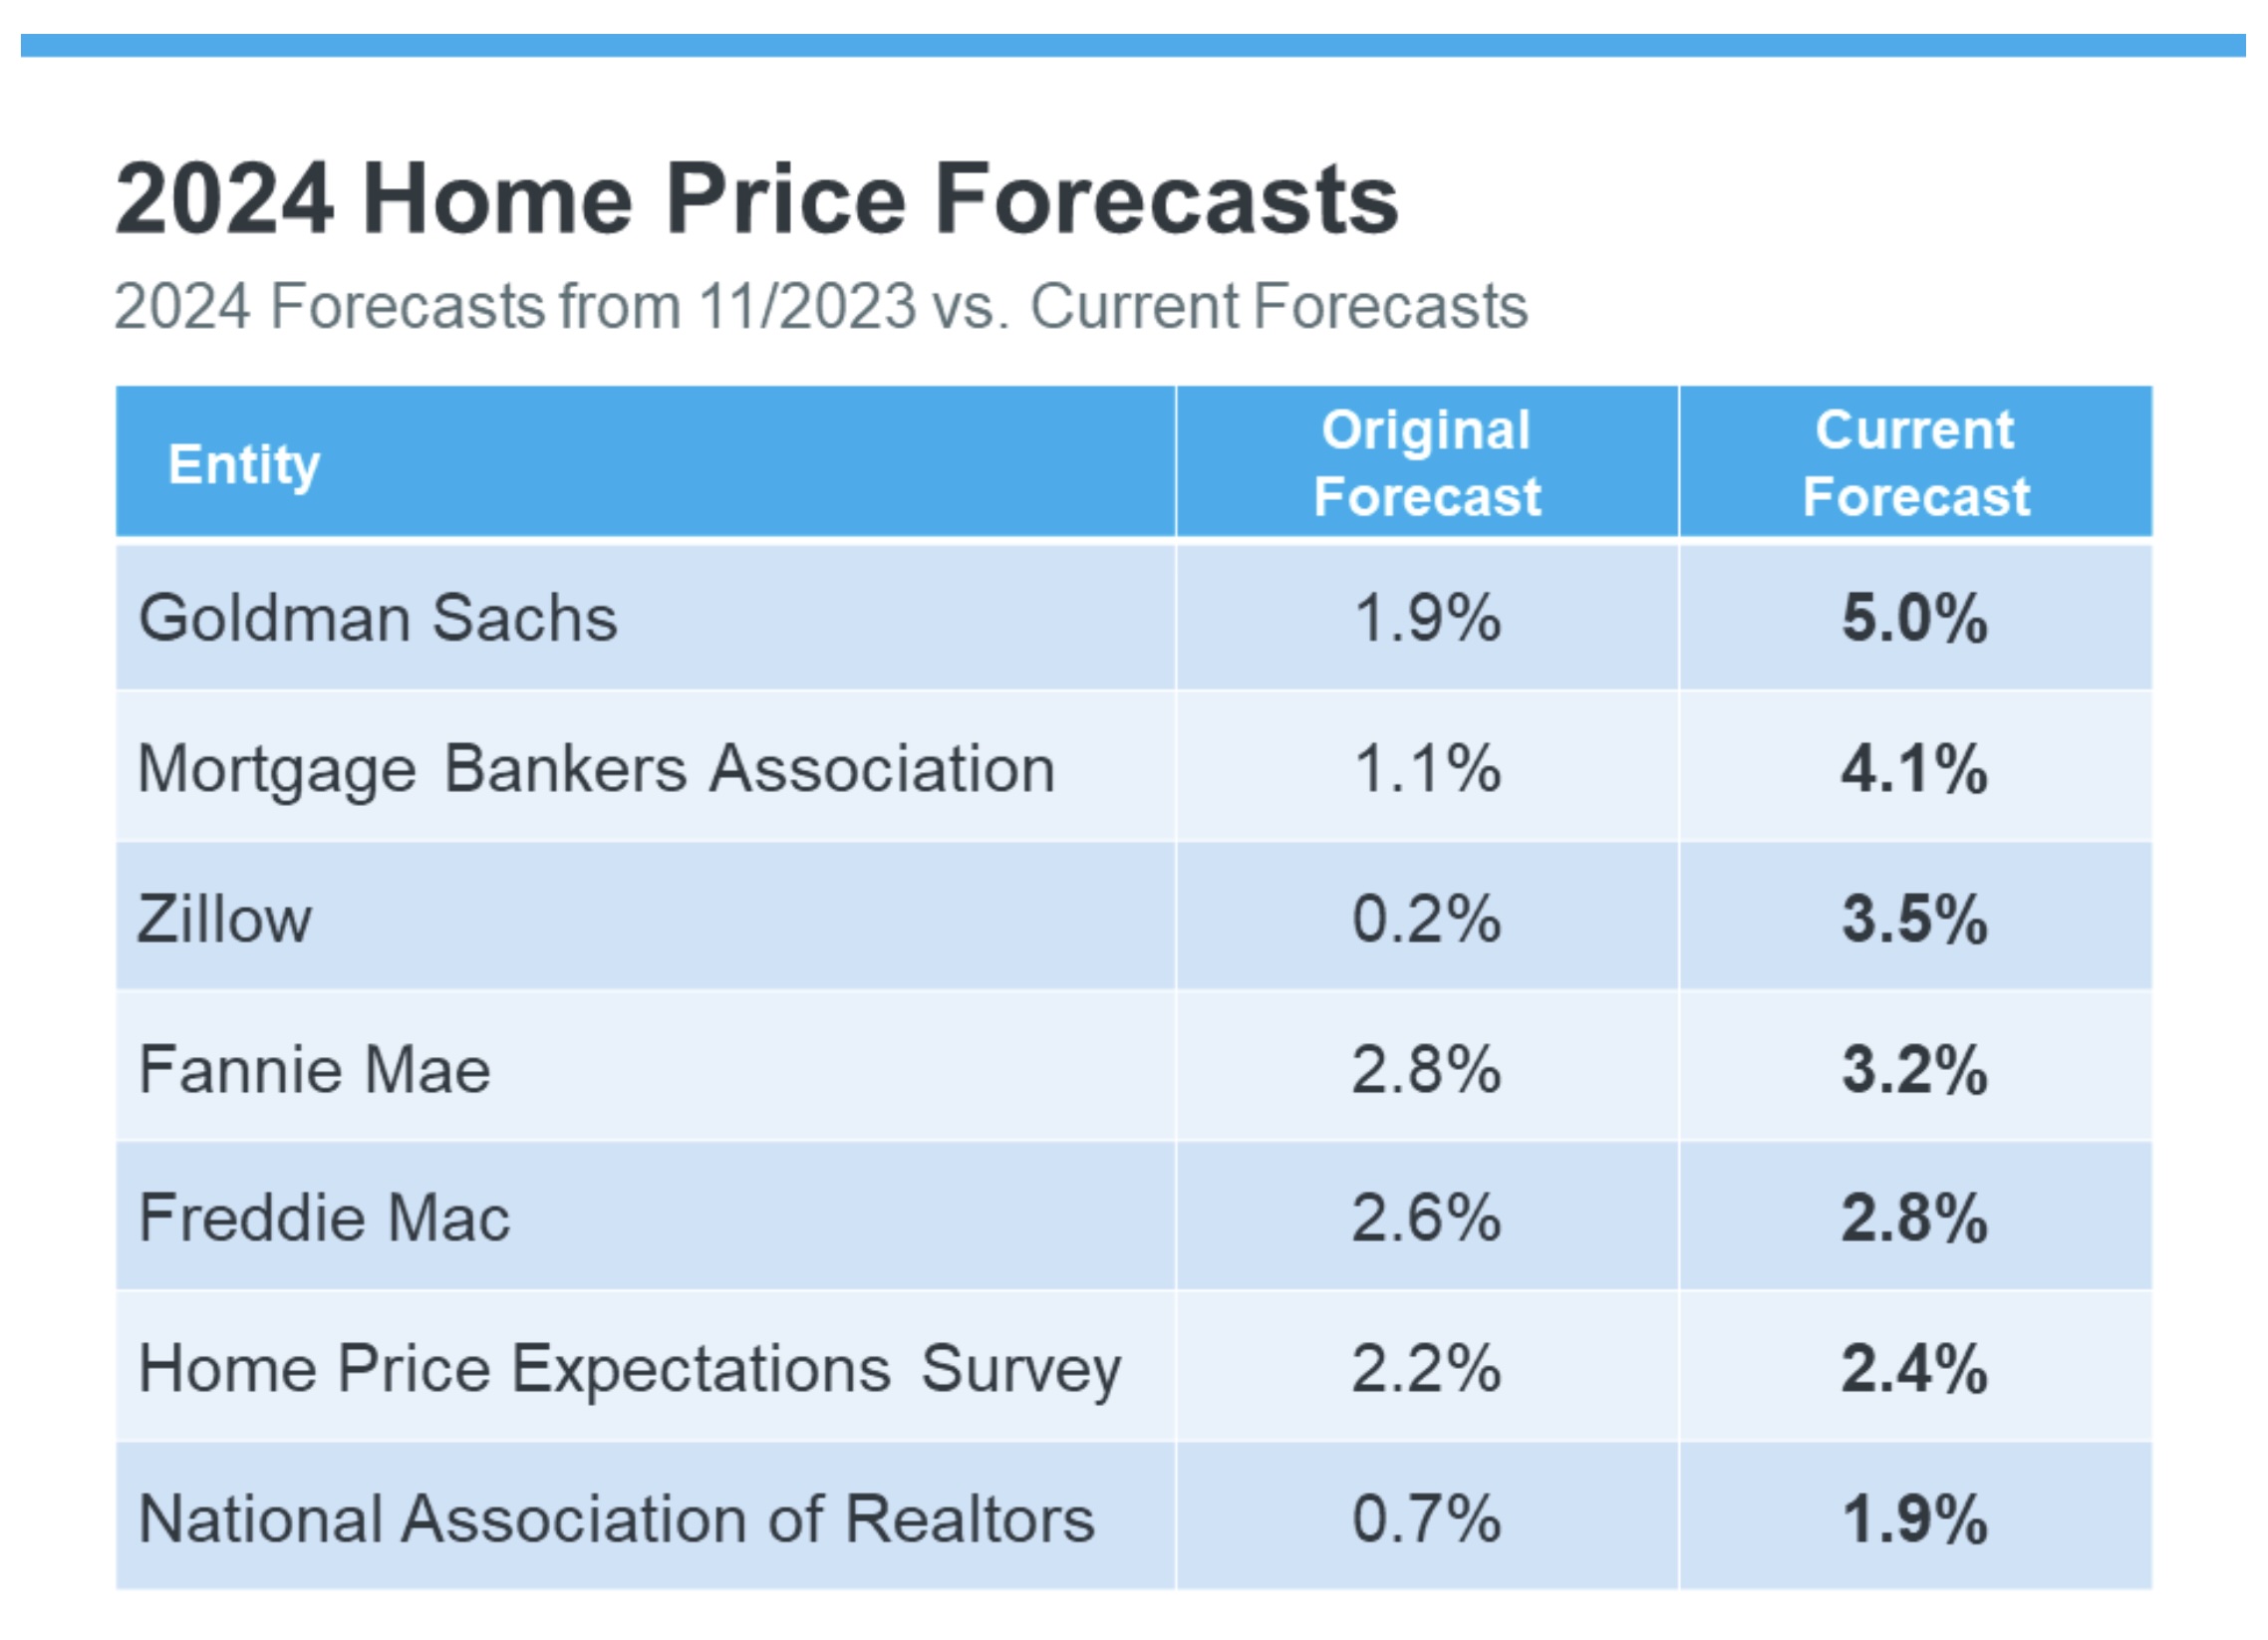 Home Price Forecasts Detail